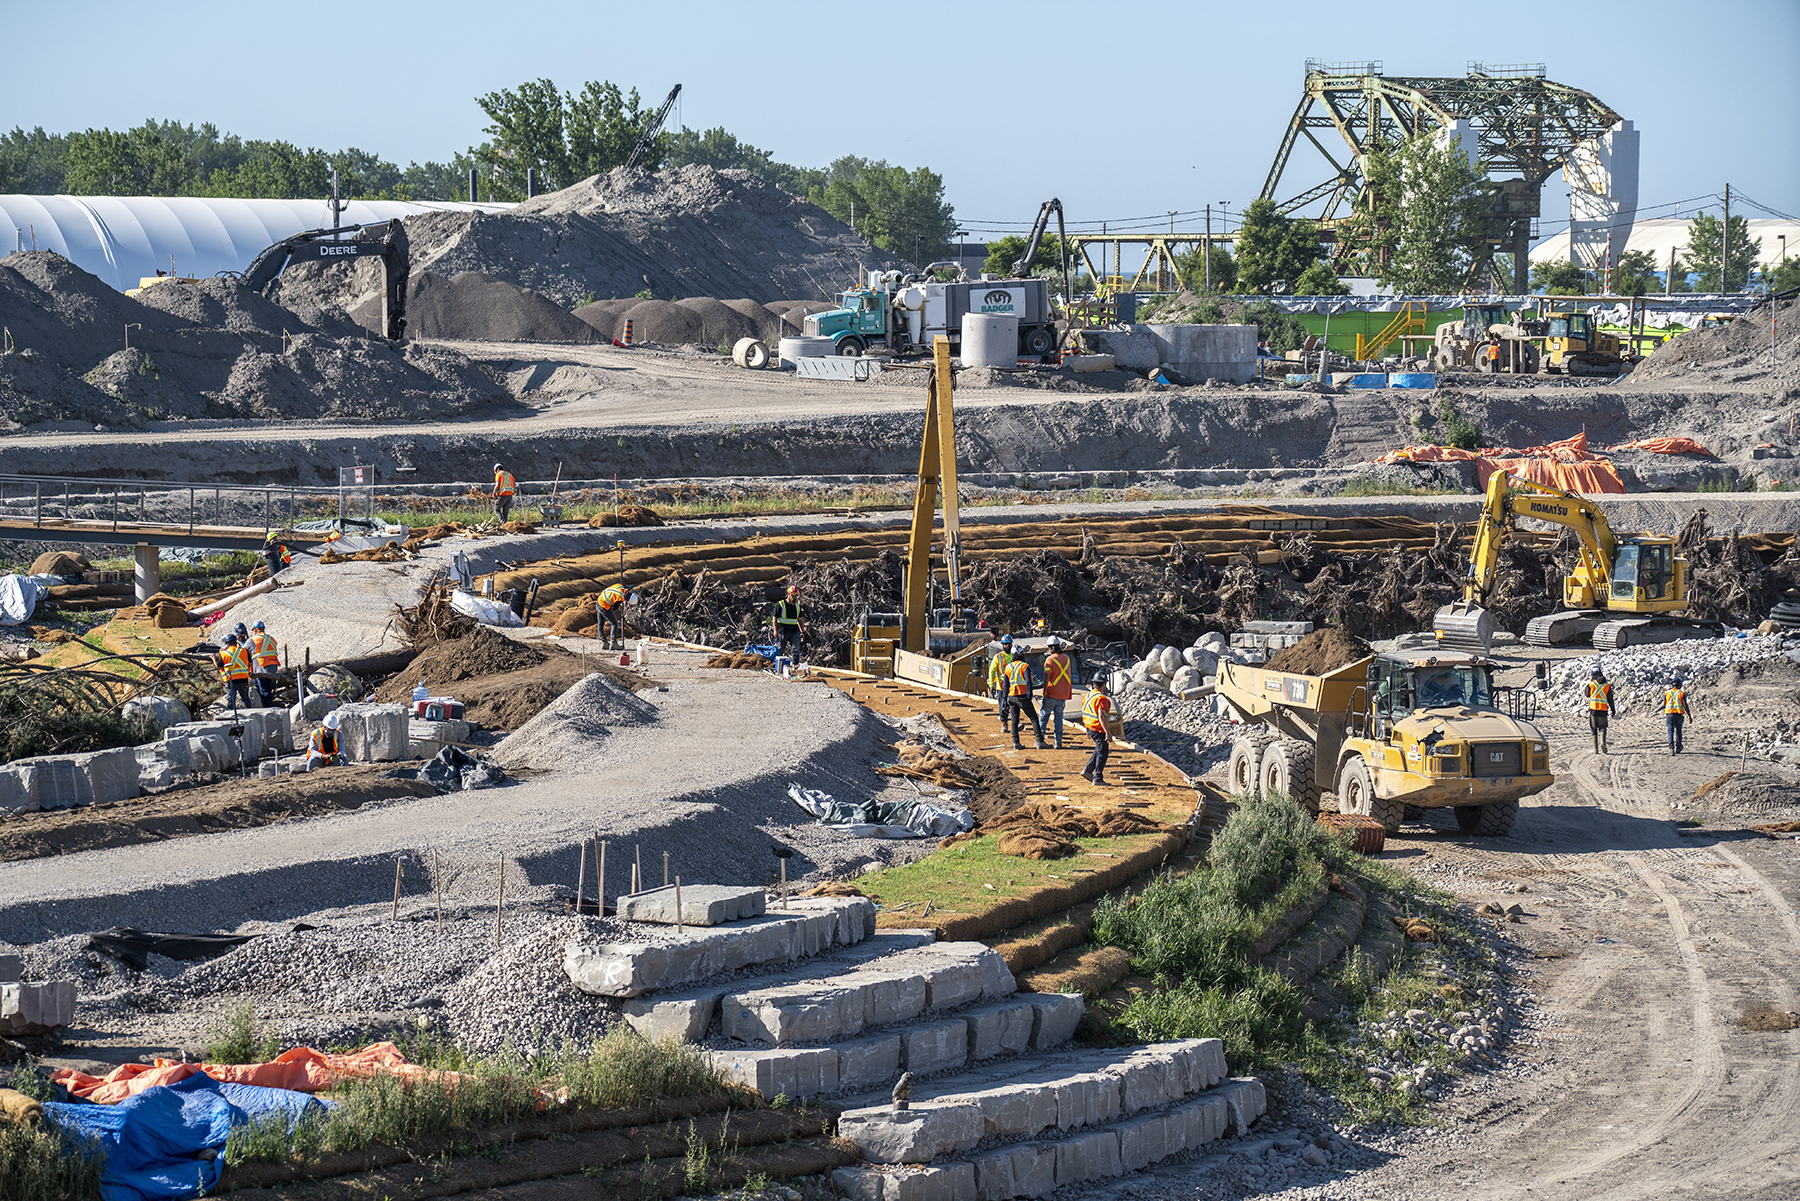 Construction of the naturalized river channel in July 2022. (Image courtesy of Waterfront Toronto/Vid Ingelevics/Ryan Walker)